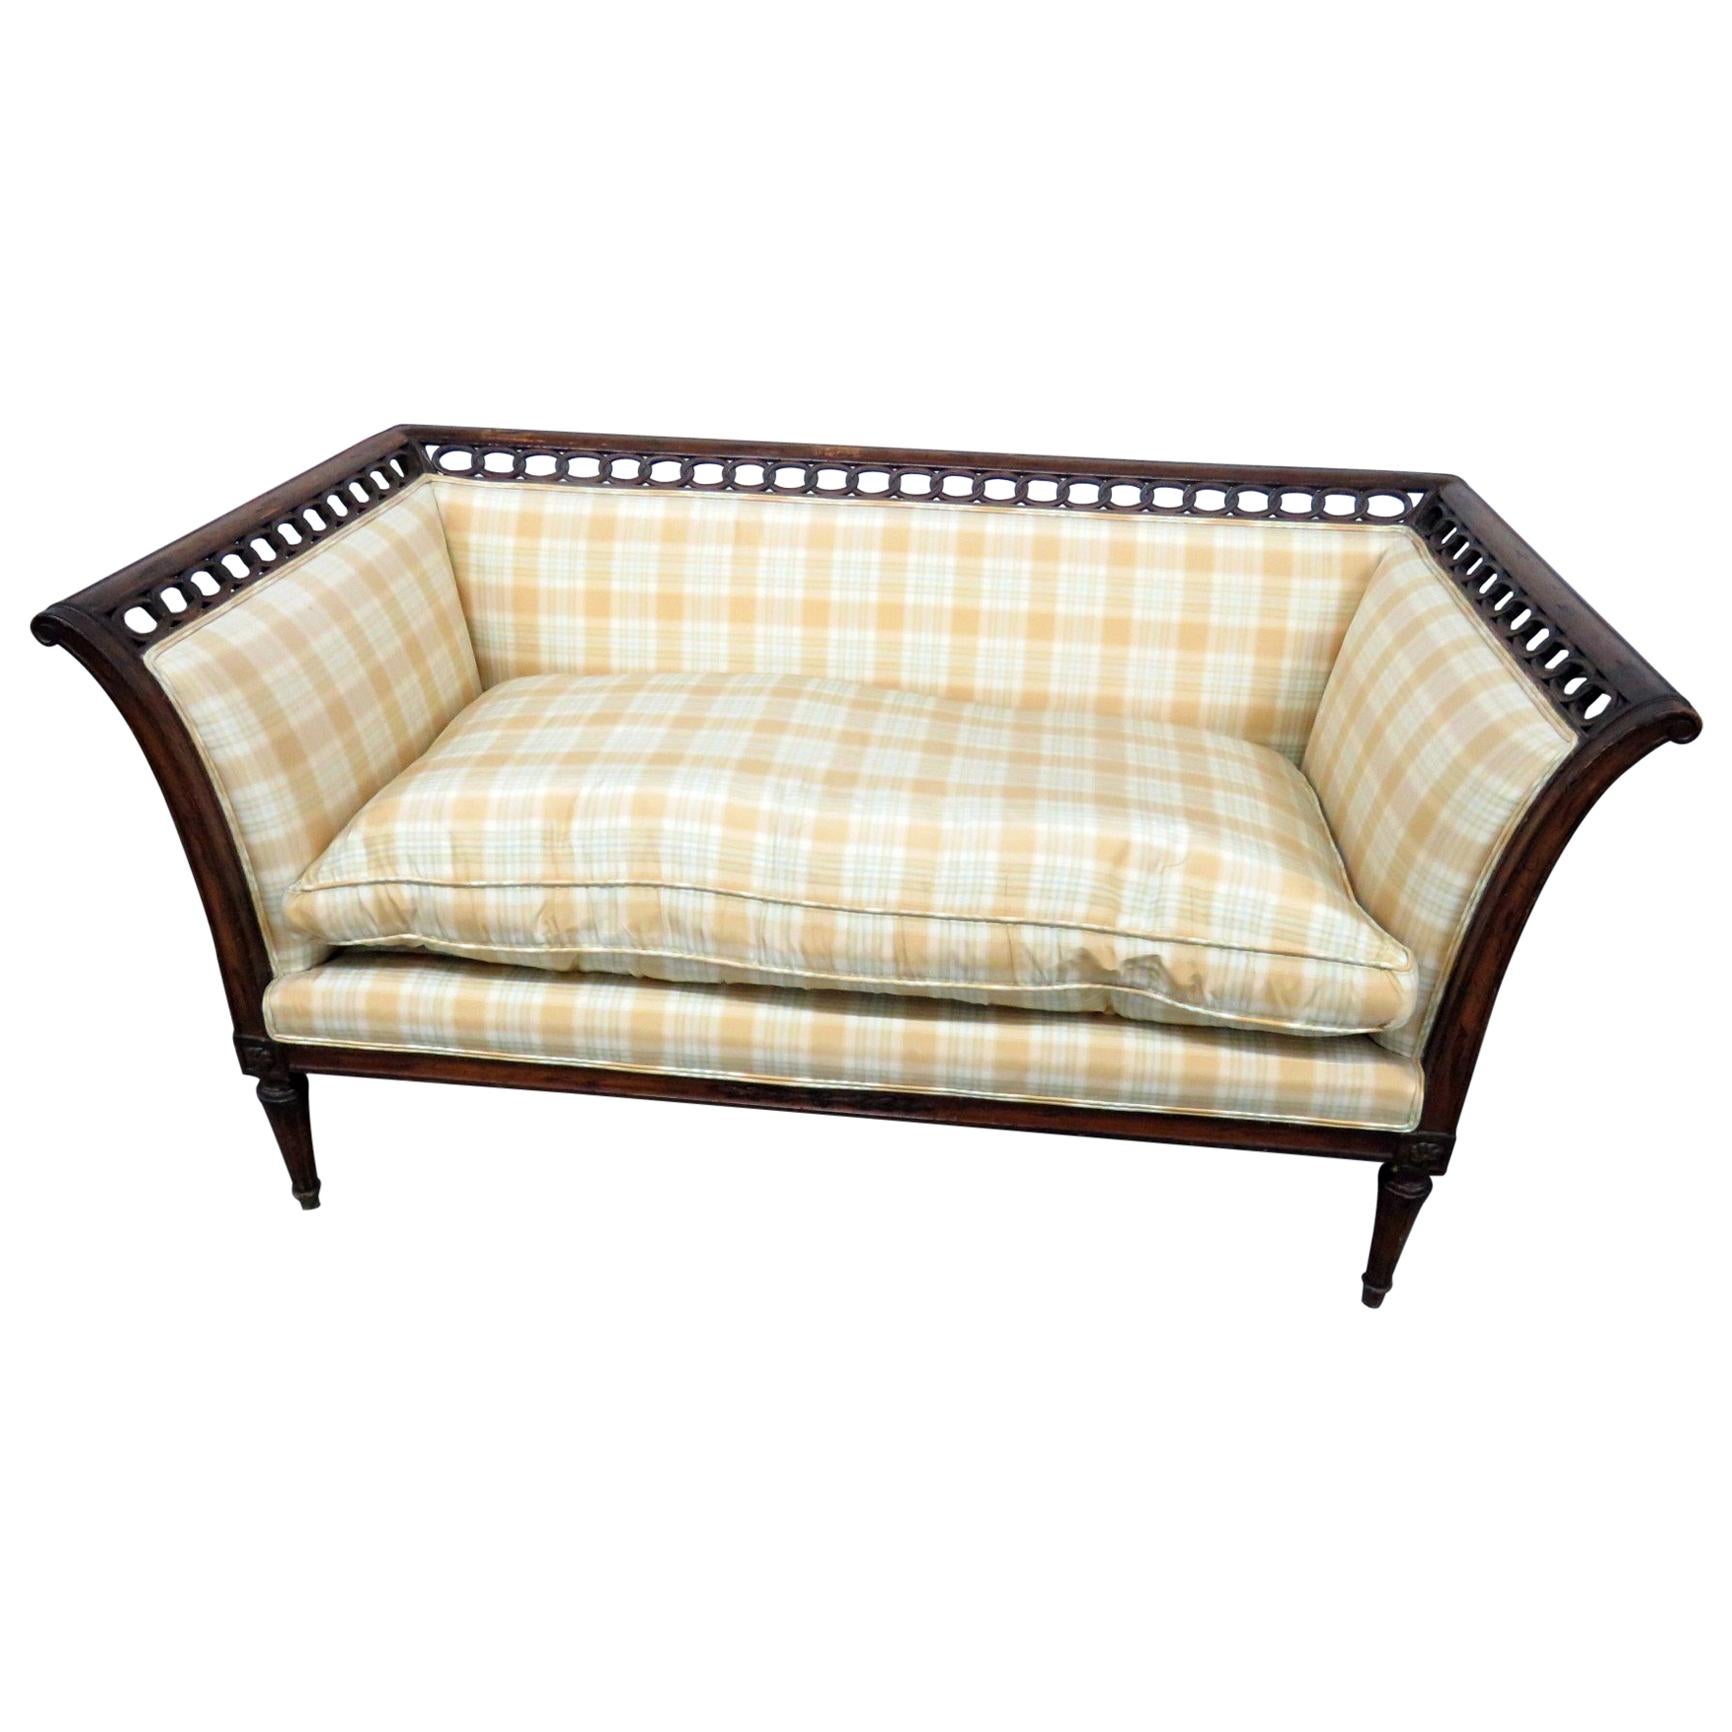 French Reticulated Carved Mahogany Louis XVI Style Settee Sofa Couch Canape